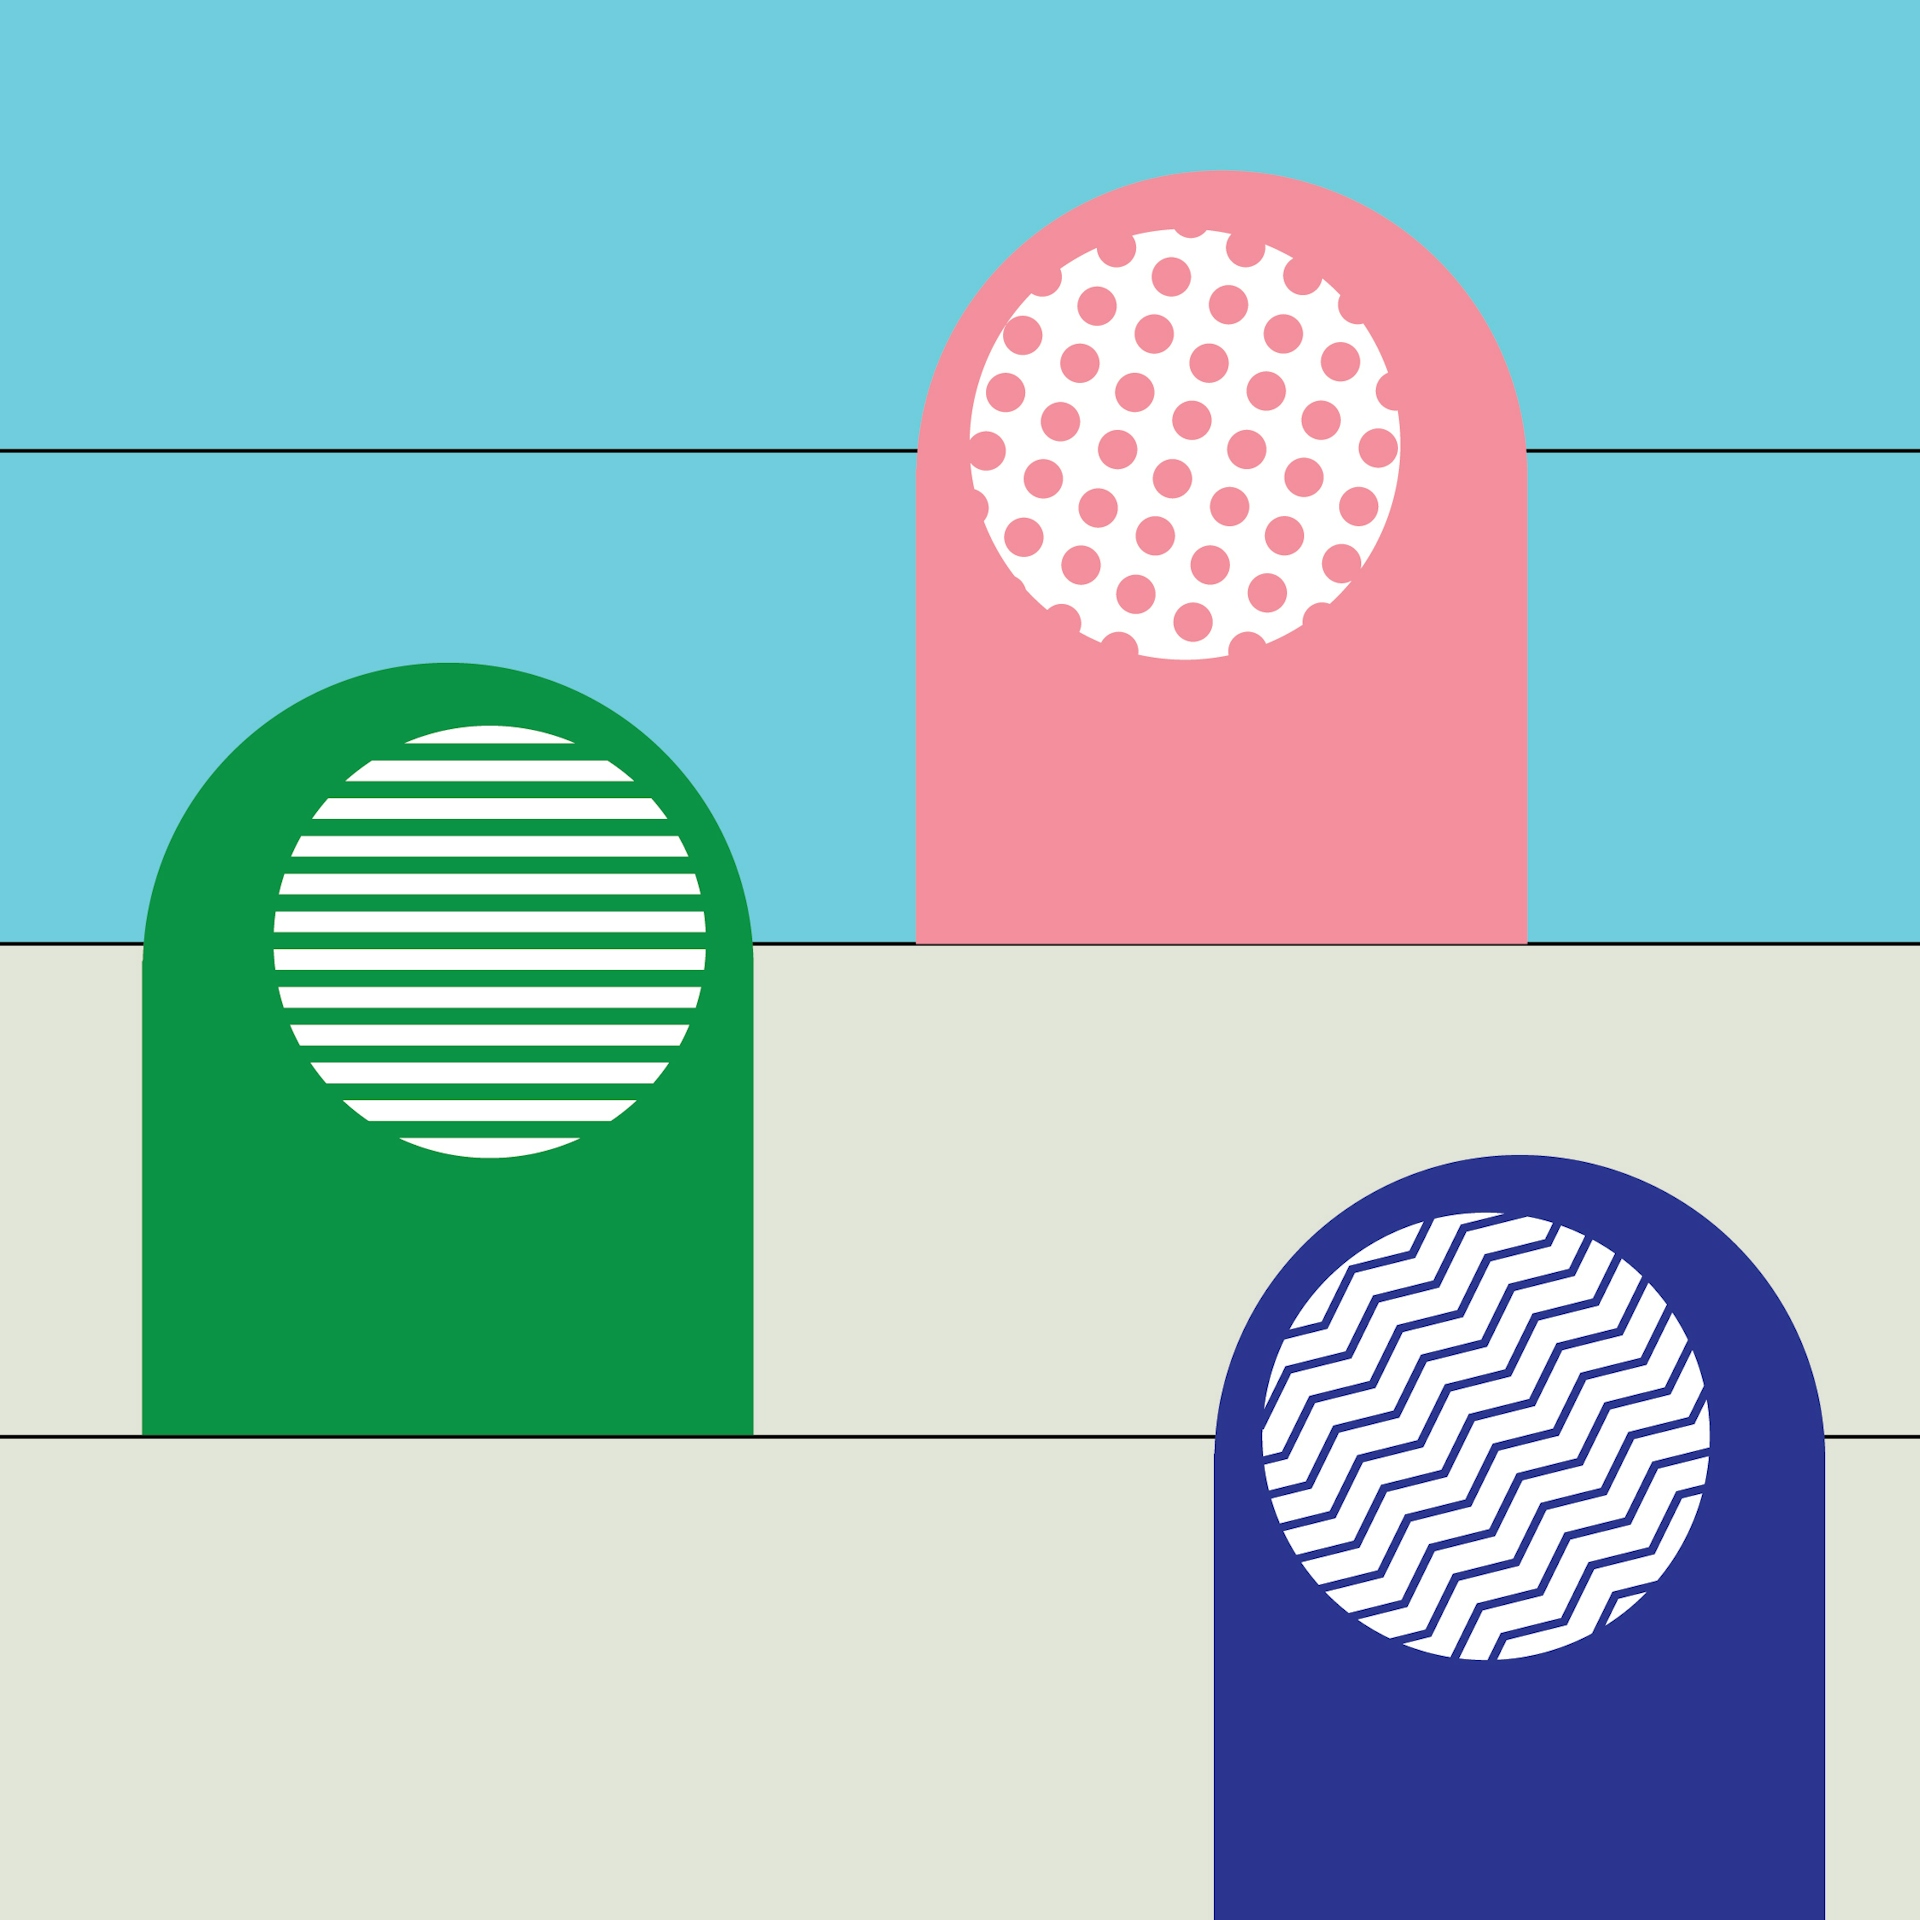 Pink, green, and blue figures on a light blue and gray background